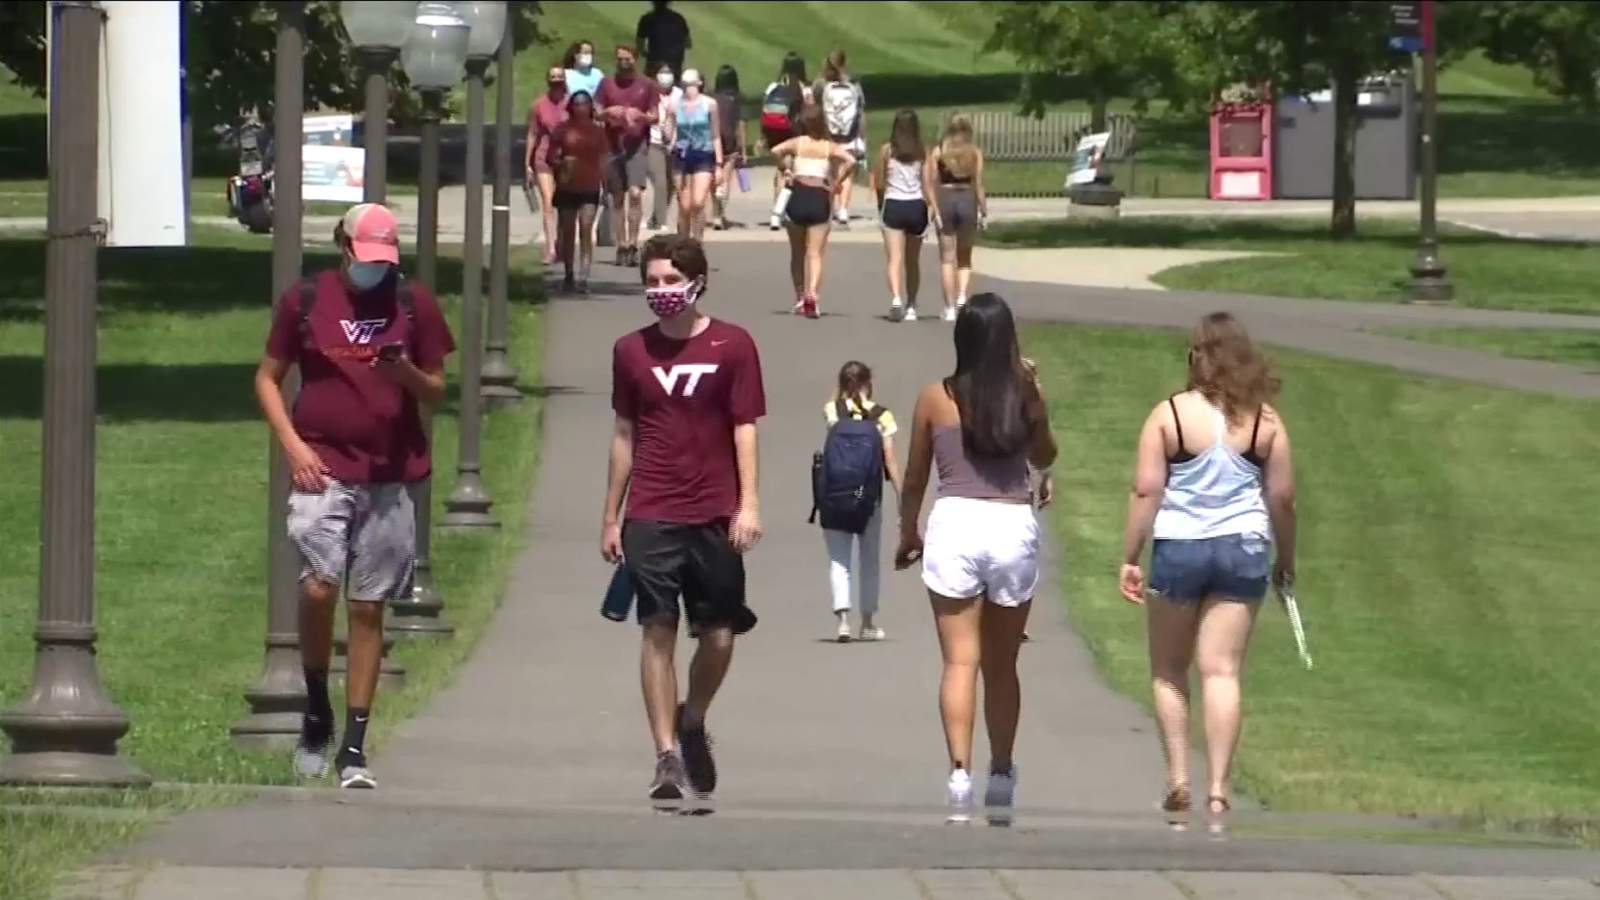 College students aren’t to blame for spike in New River Valley coronavirus cases, officials say